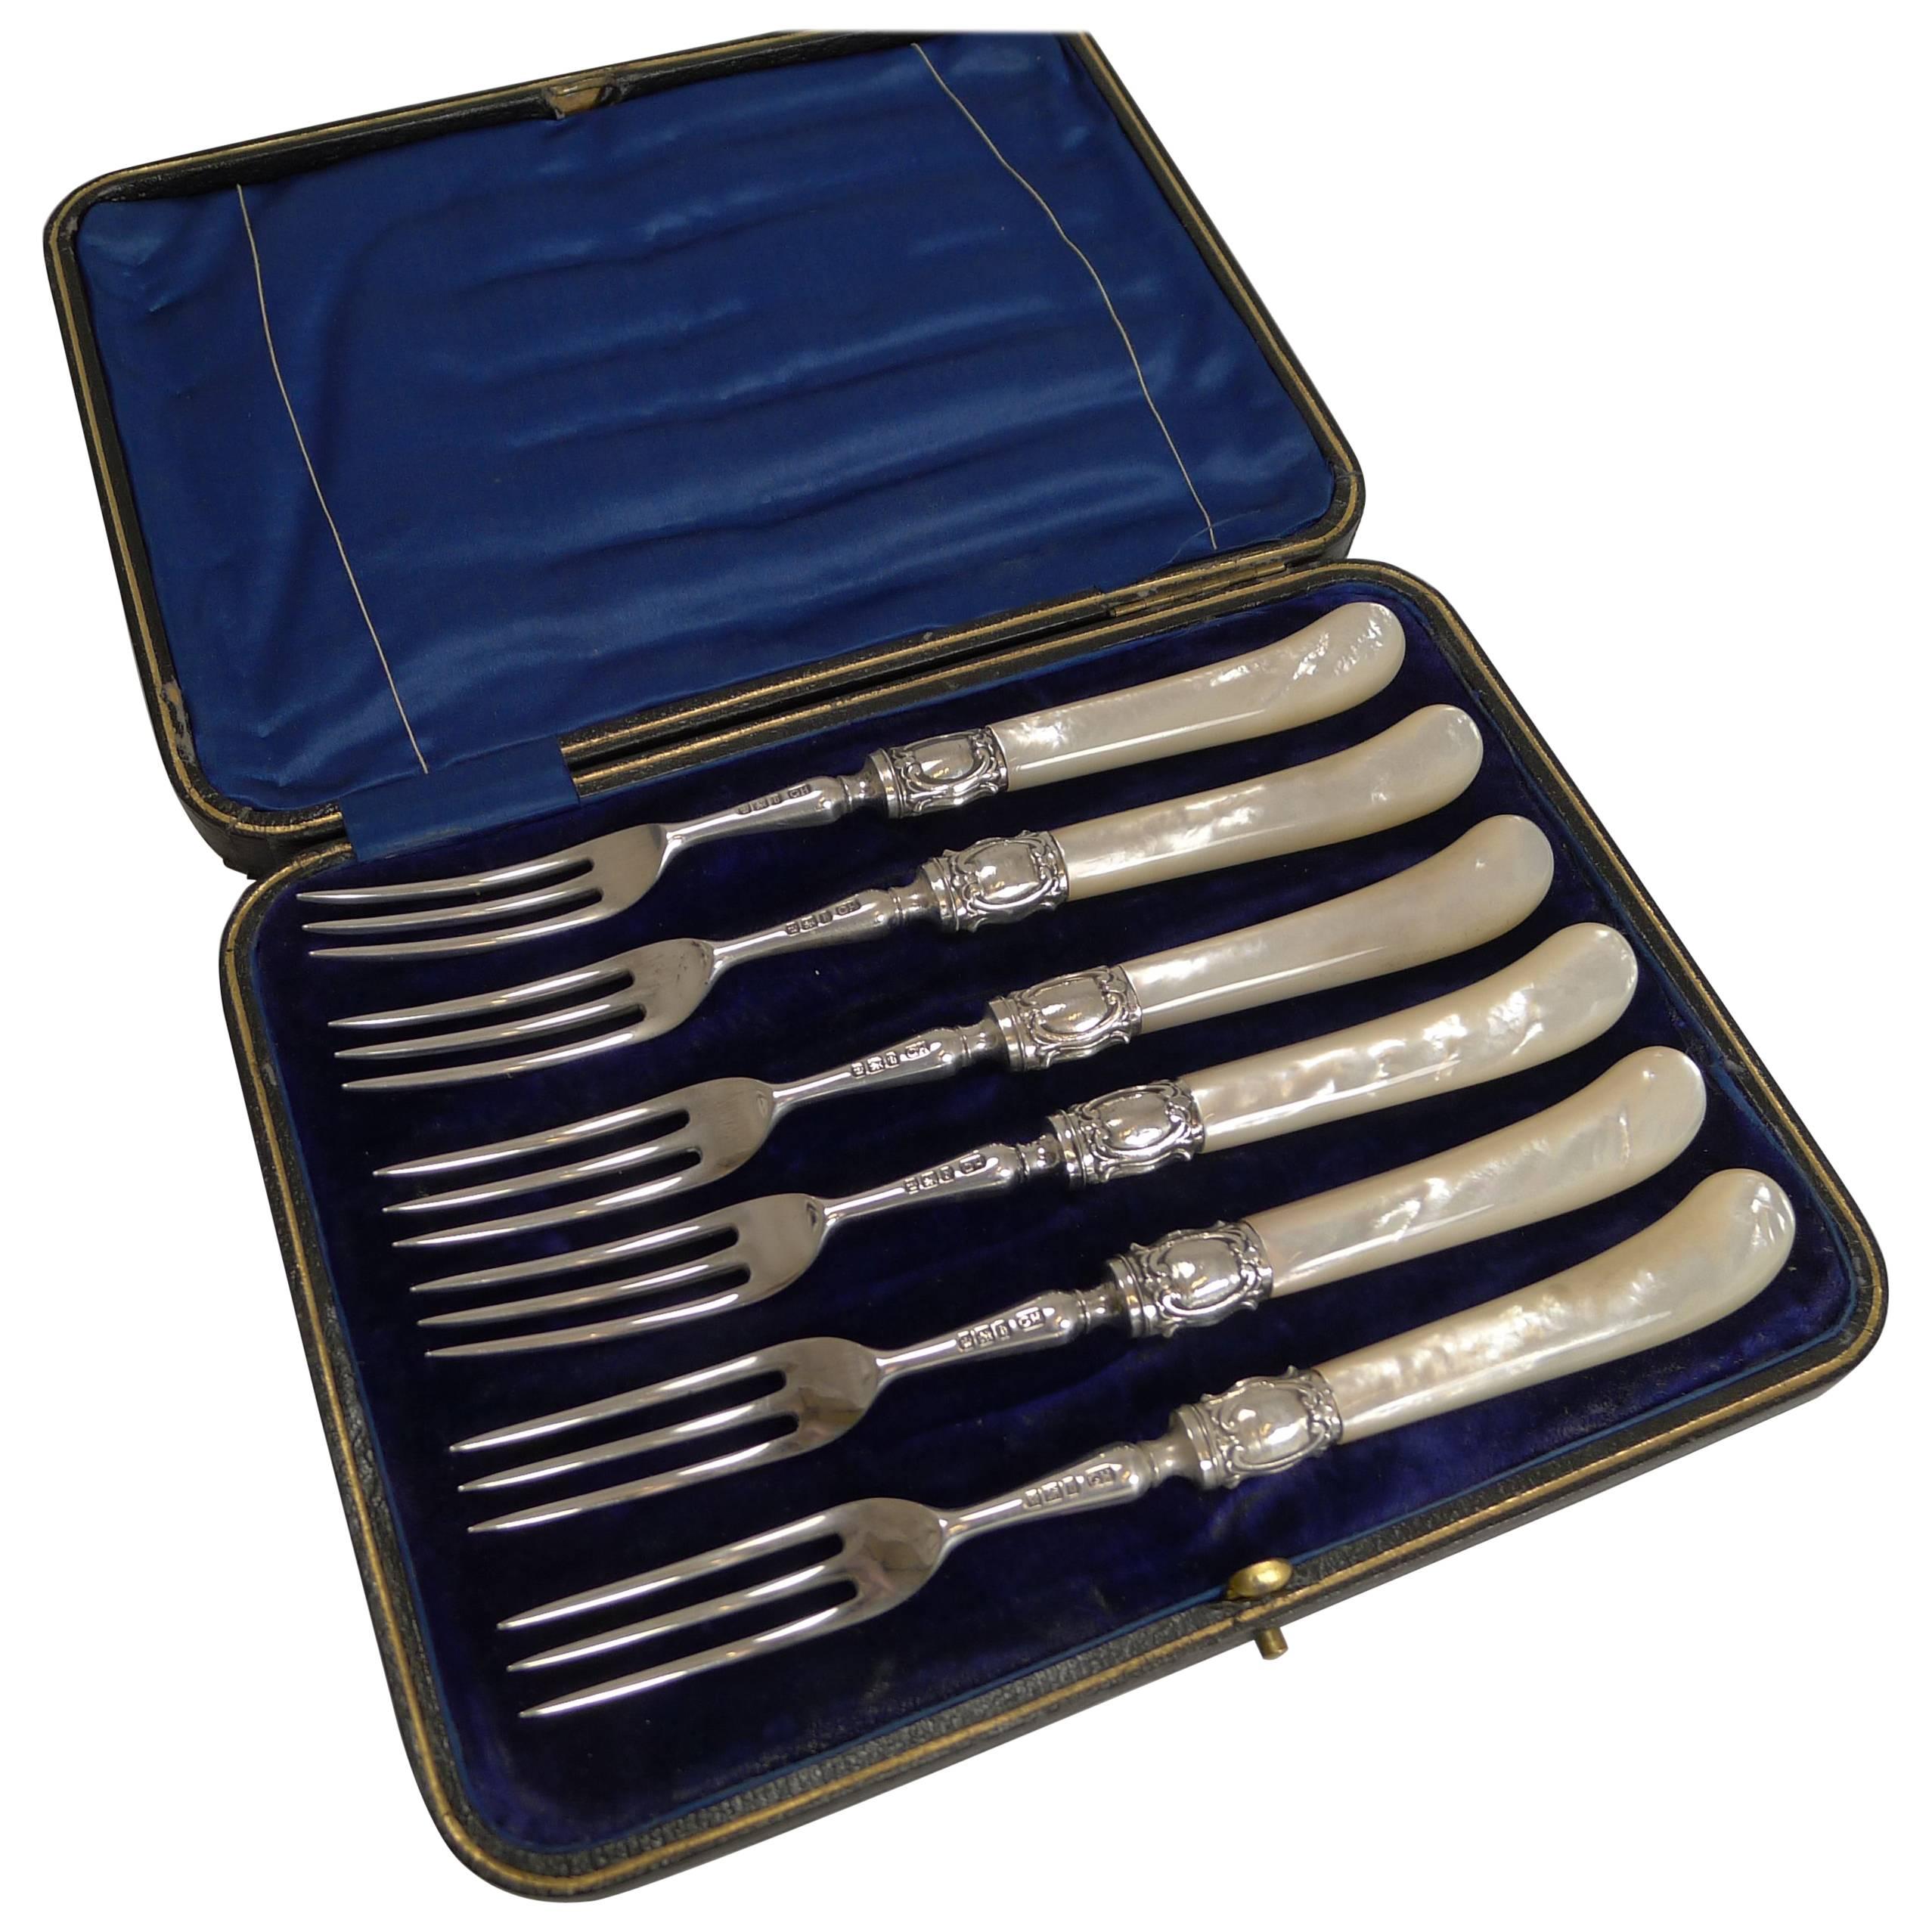 Antique English Sterling Silver and Mother-of-Pearl Cake or Desert Forks, 1900